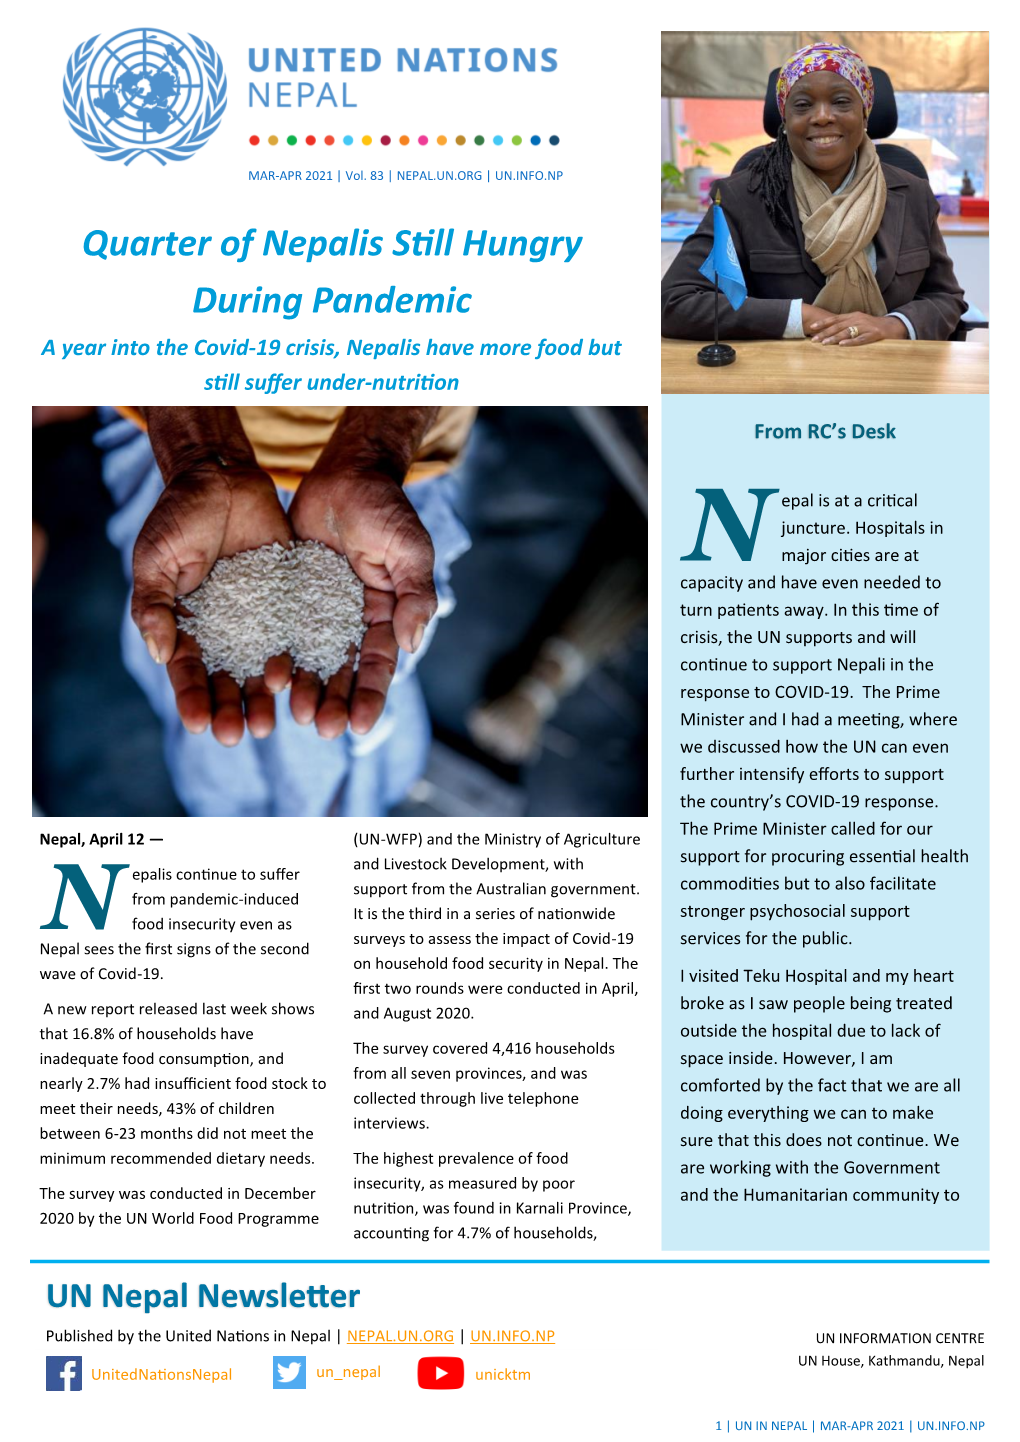 Quarter of Nepalis Still Hungry During Pandemic a Year Into the Covid-19 Crisis, Nepalis Have More Food but Still Suffer Under-Nutrition